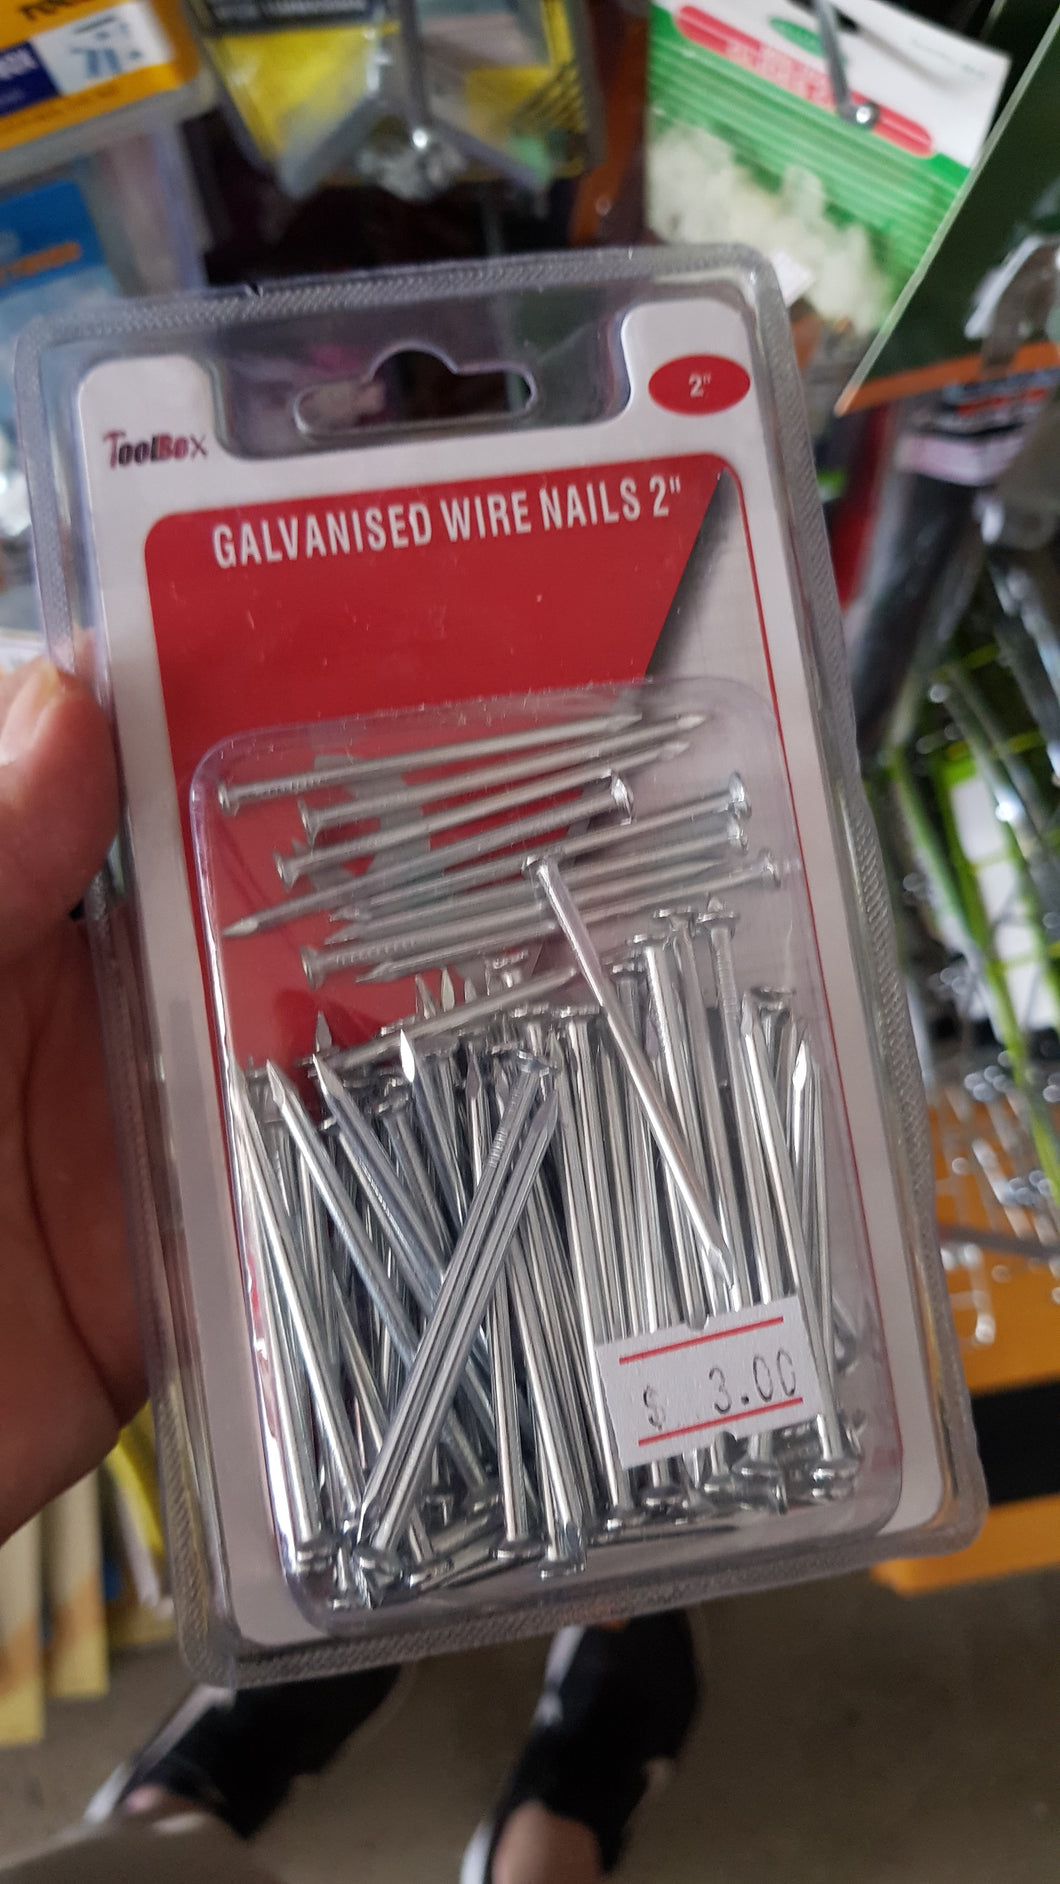 GALVANISED WIRE NAILS 2